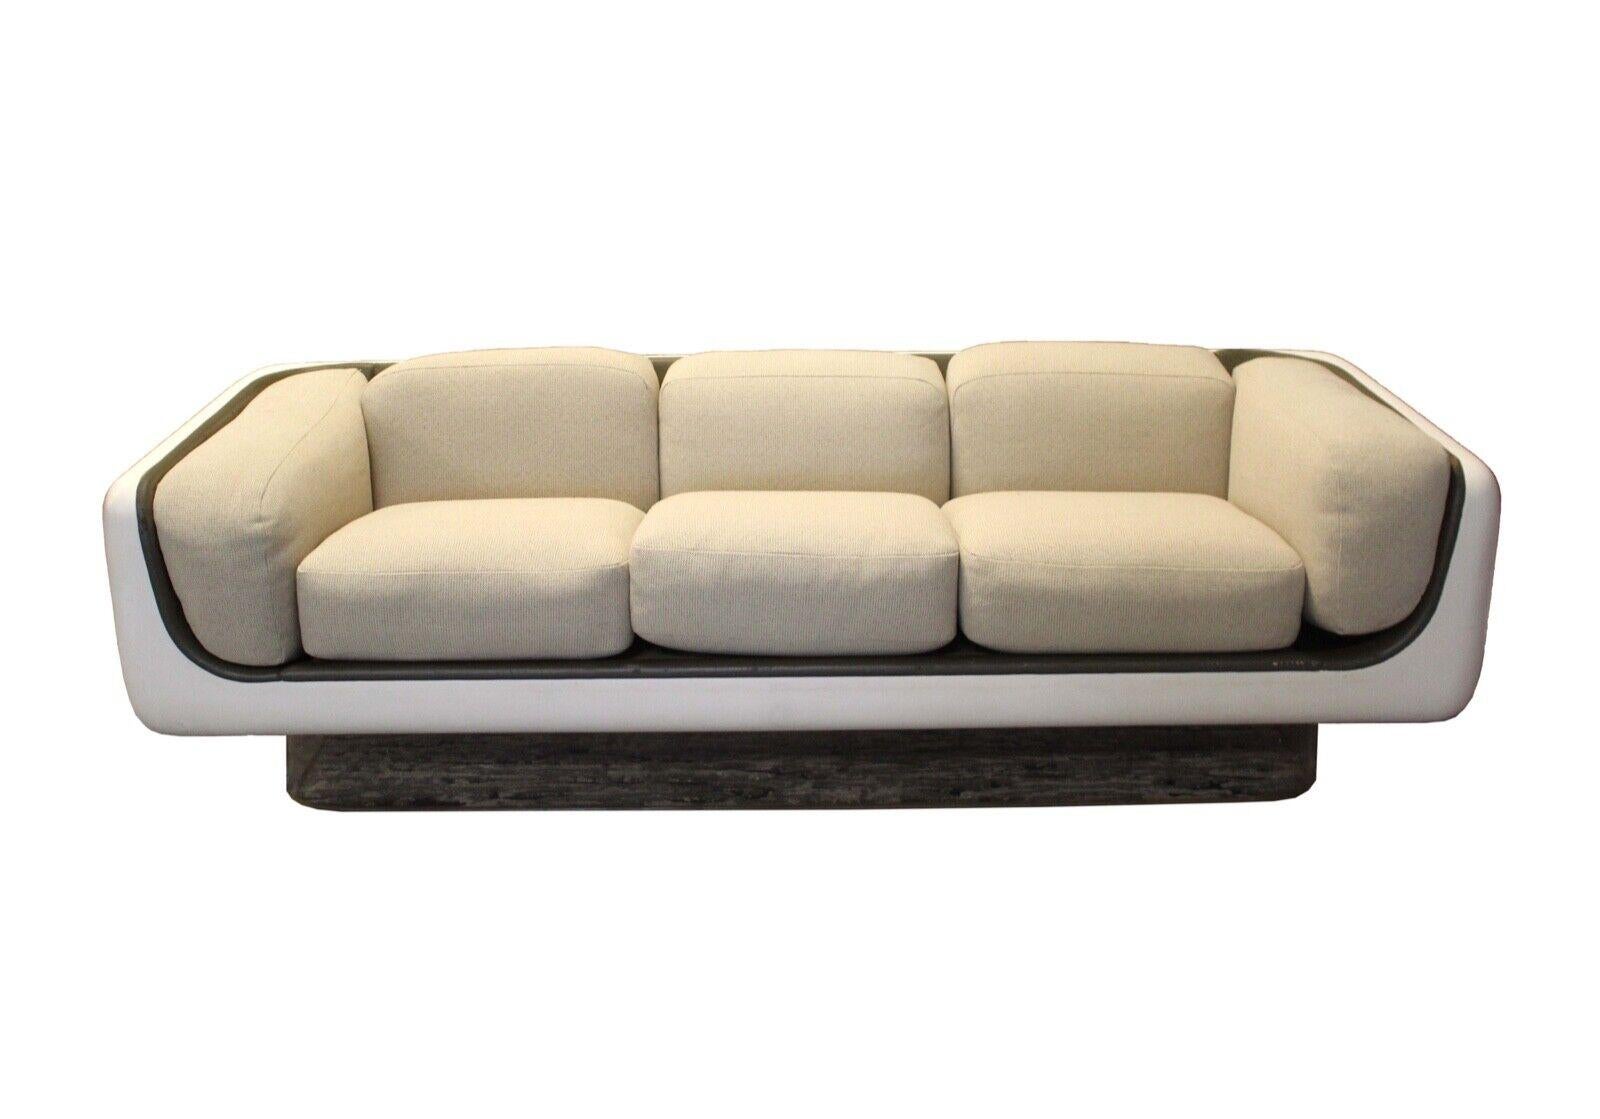 Le Shoppe Too presents this rare complete set (can also be purchased seperately by William Andrus for Steelcase, chic and cool, fiberglass floating sofa on a Lucite base and pair of matching chairs. The set is in great condition except for the